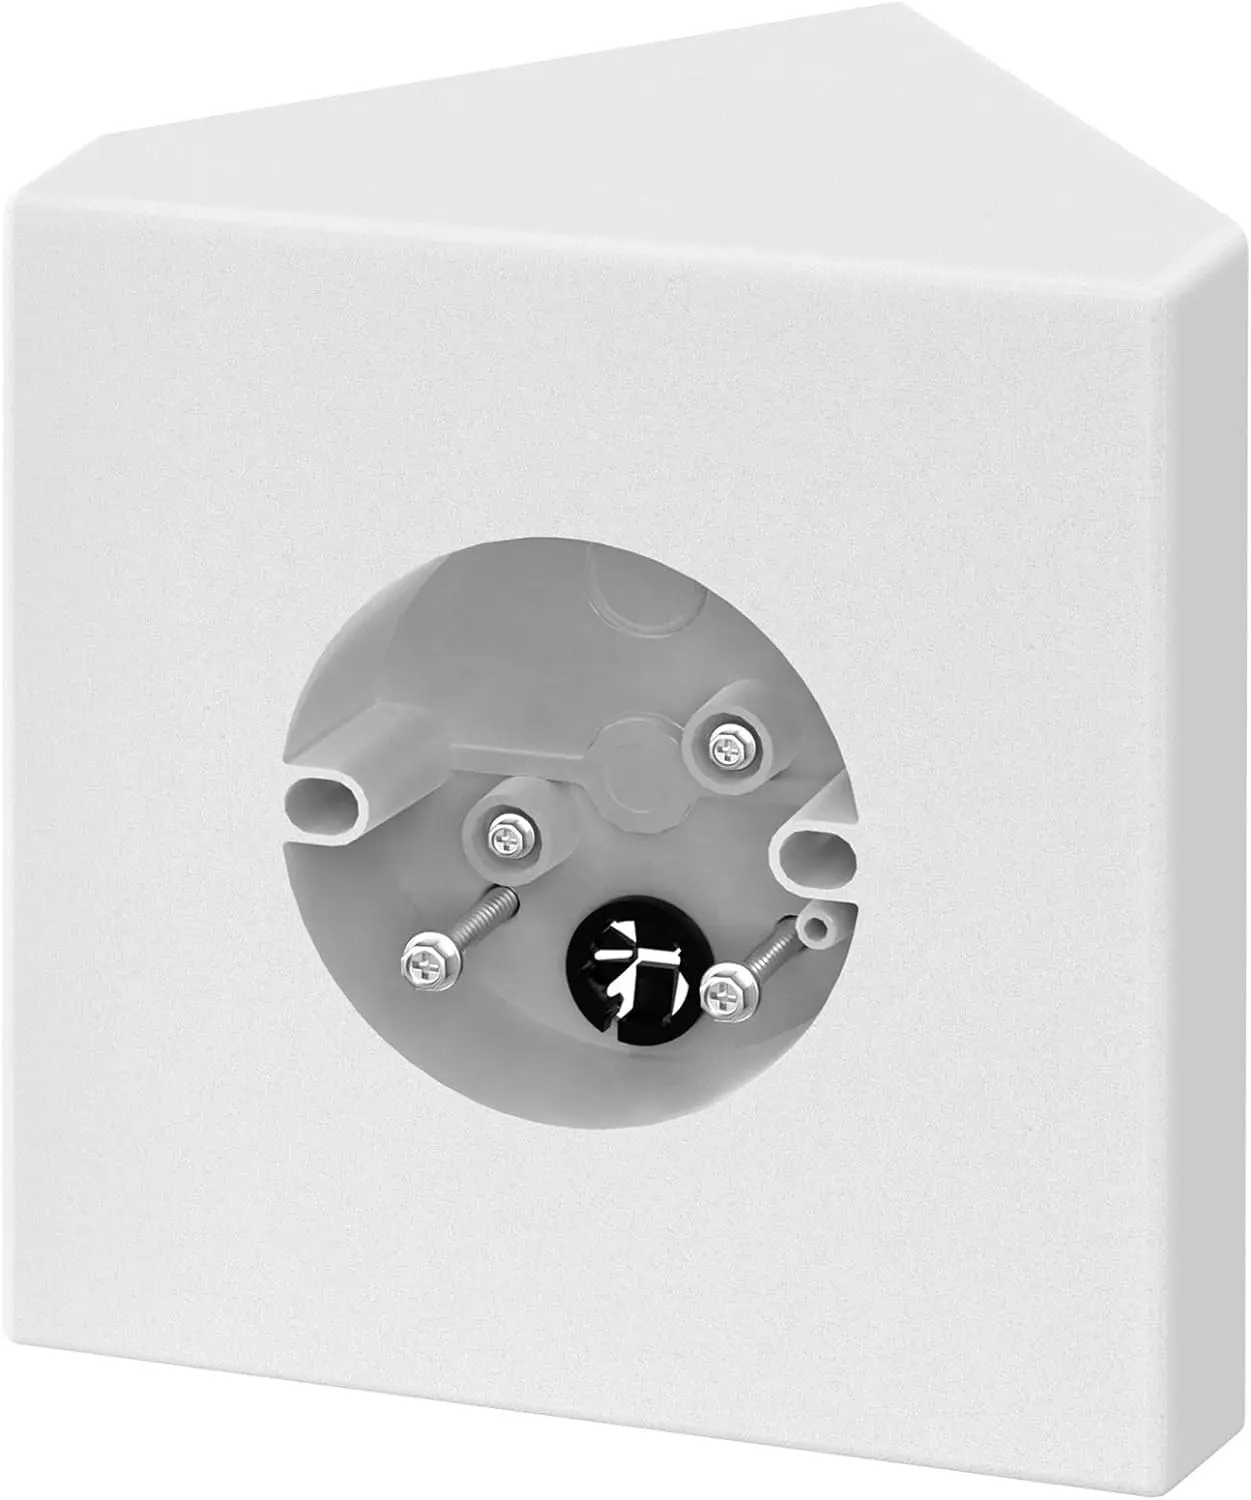 Fan Mounting Box, Ceiling Fan Mounting Bracket Fits Cathedral Ceiling Angles of 80 degree or Up, White